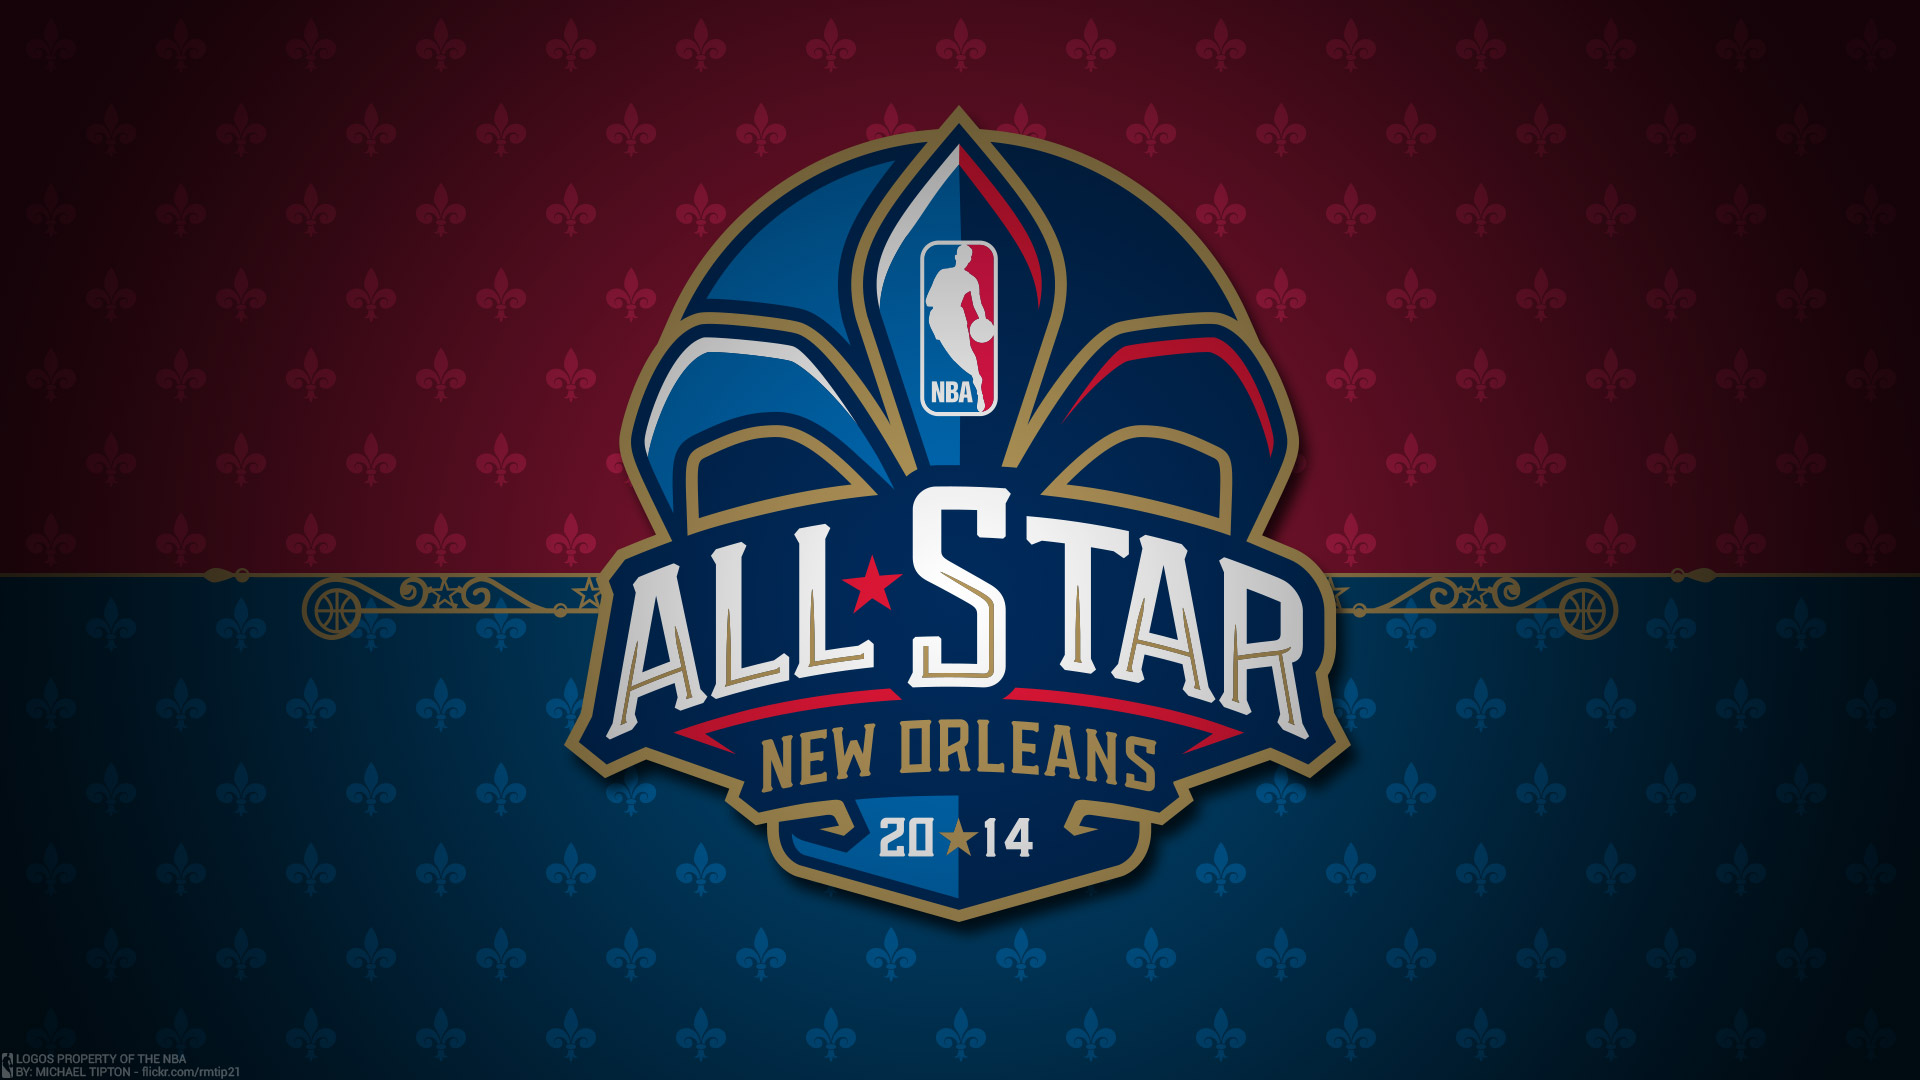 iWallpapers - NBA All Star backgrounds | iPad and iPhone wallpapers